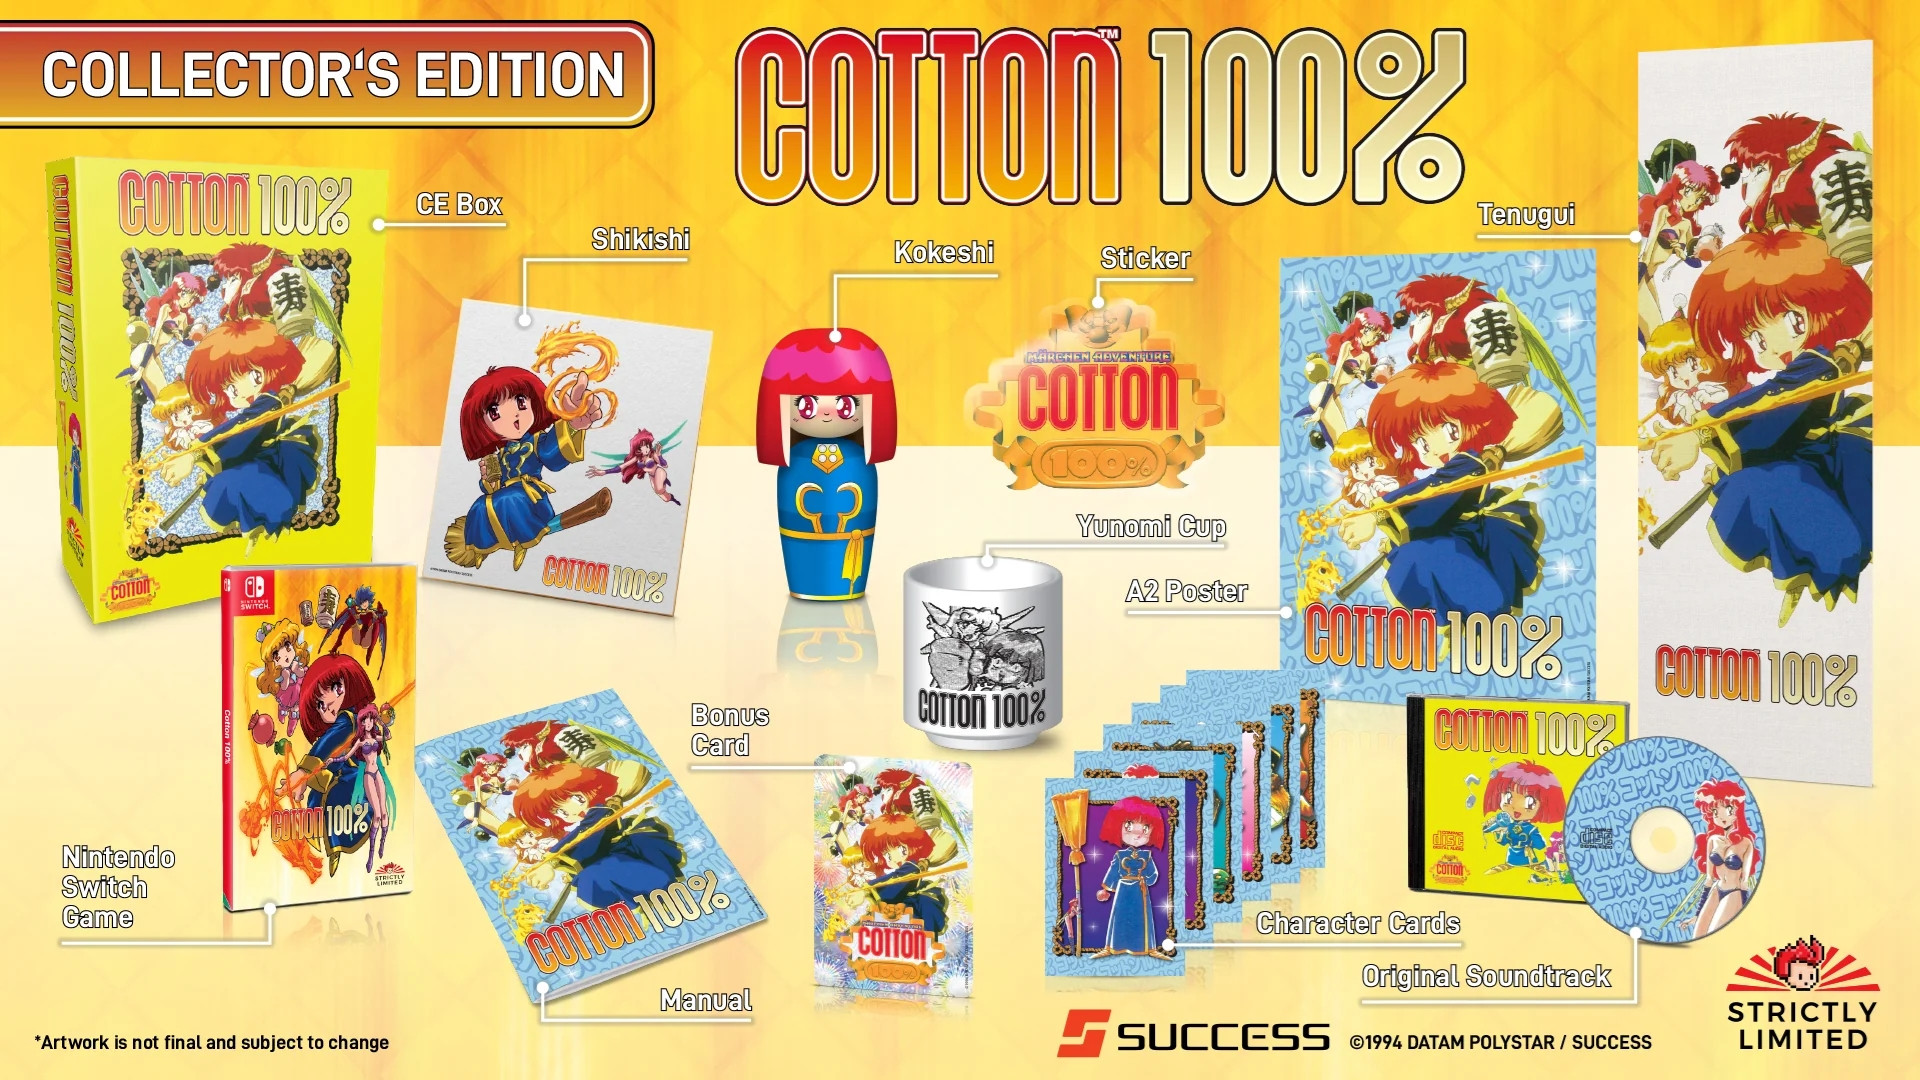 Cotton 100% Collector's Edition - Nintendo Switch